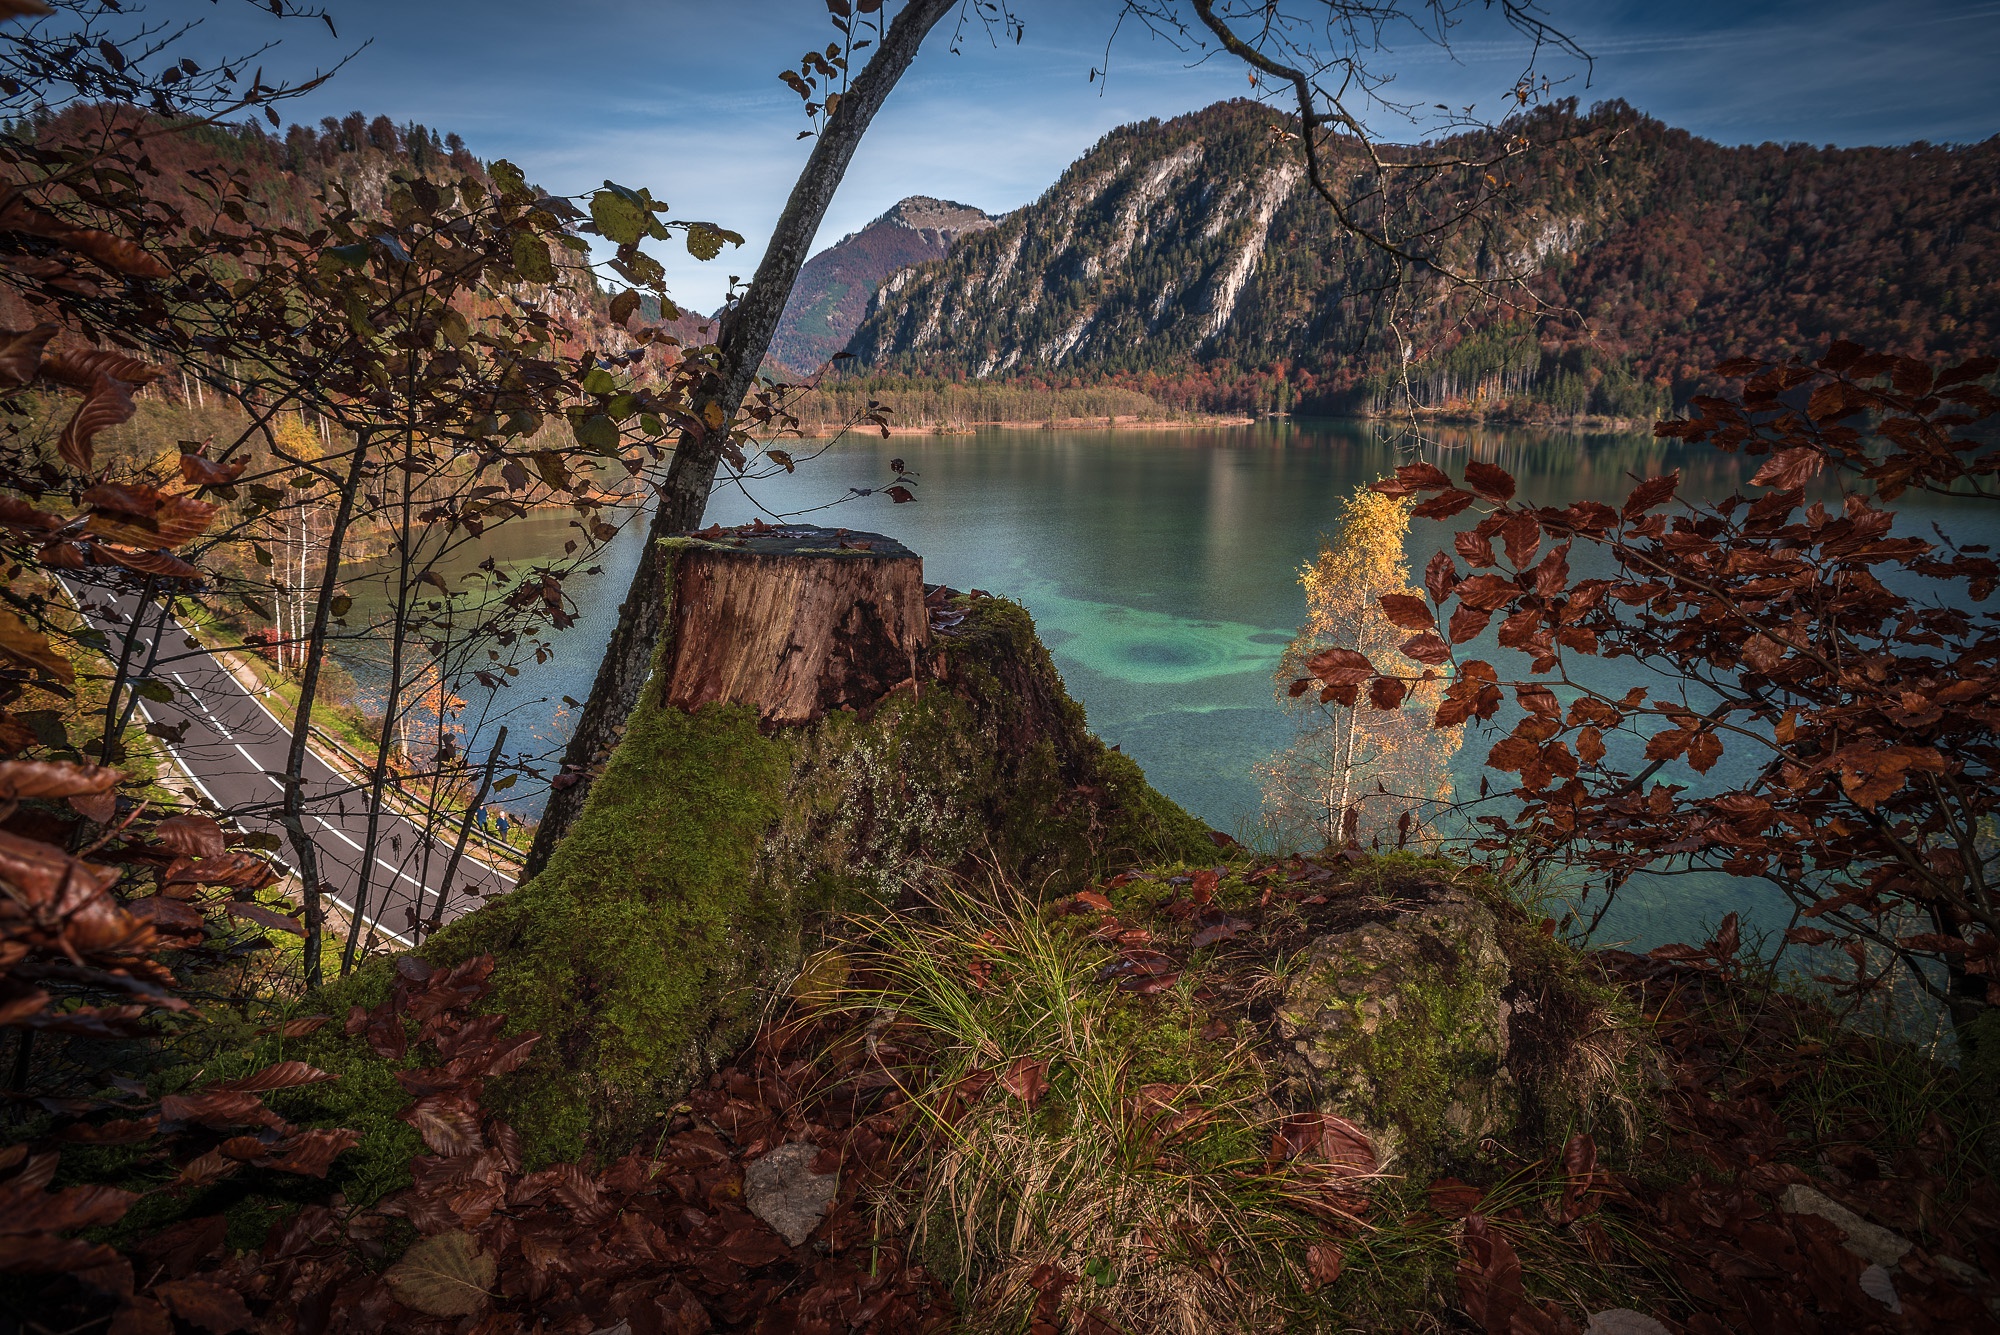 photography, lake, austria, fall, mountain, nature, road, stump, lakes wallpapers for tablet